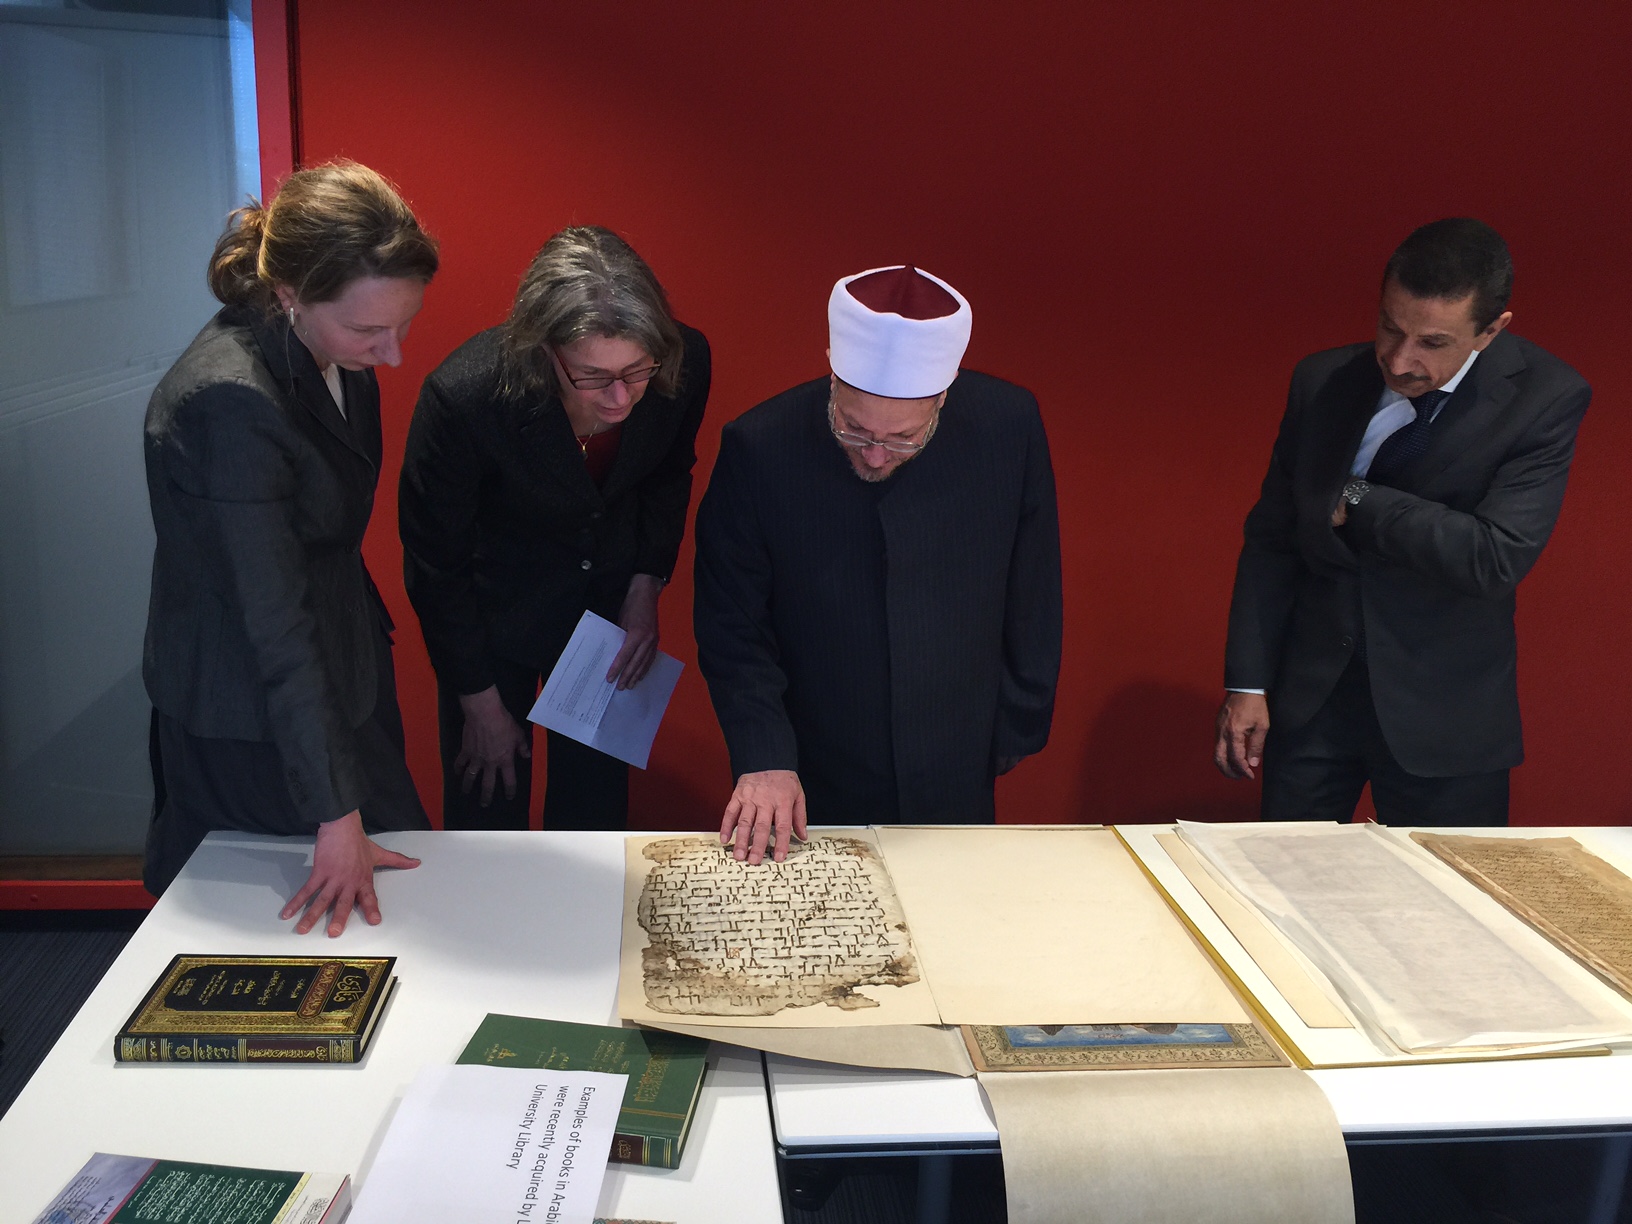 Egypt’s Grand Mufti delivers an important lecture in Leiden University